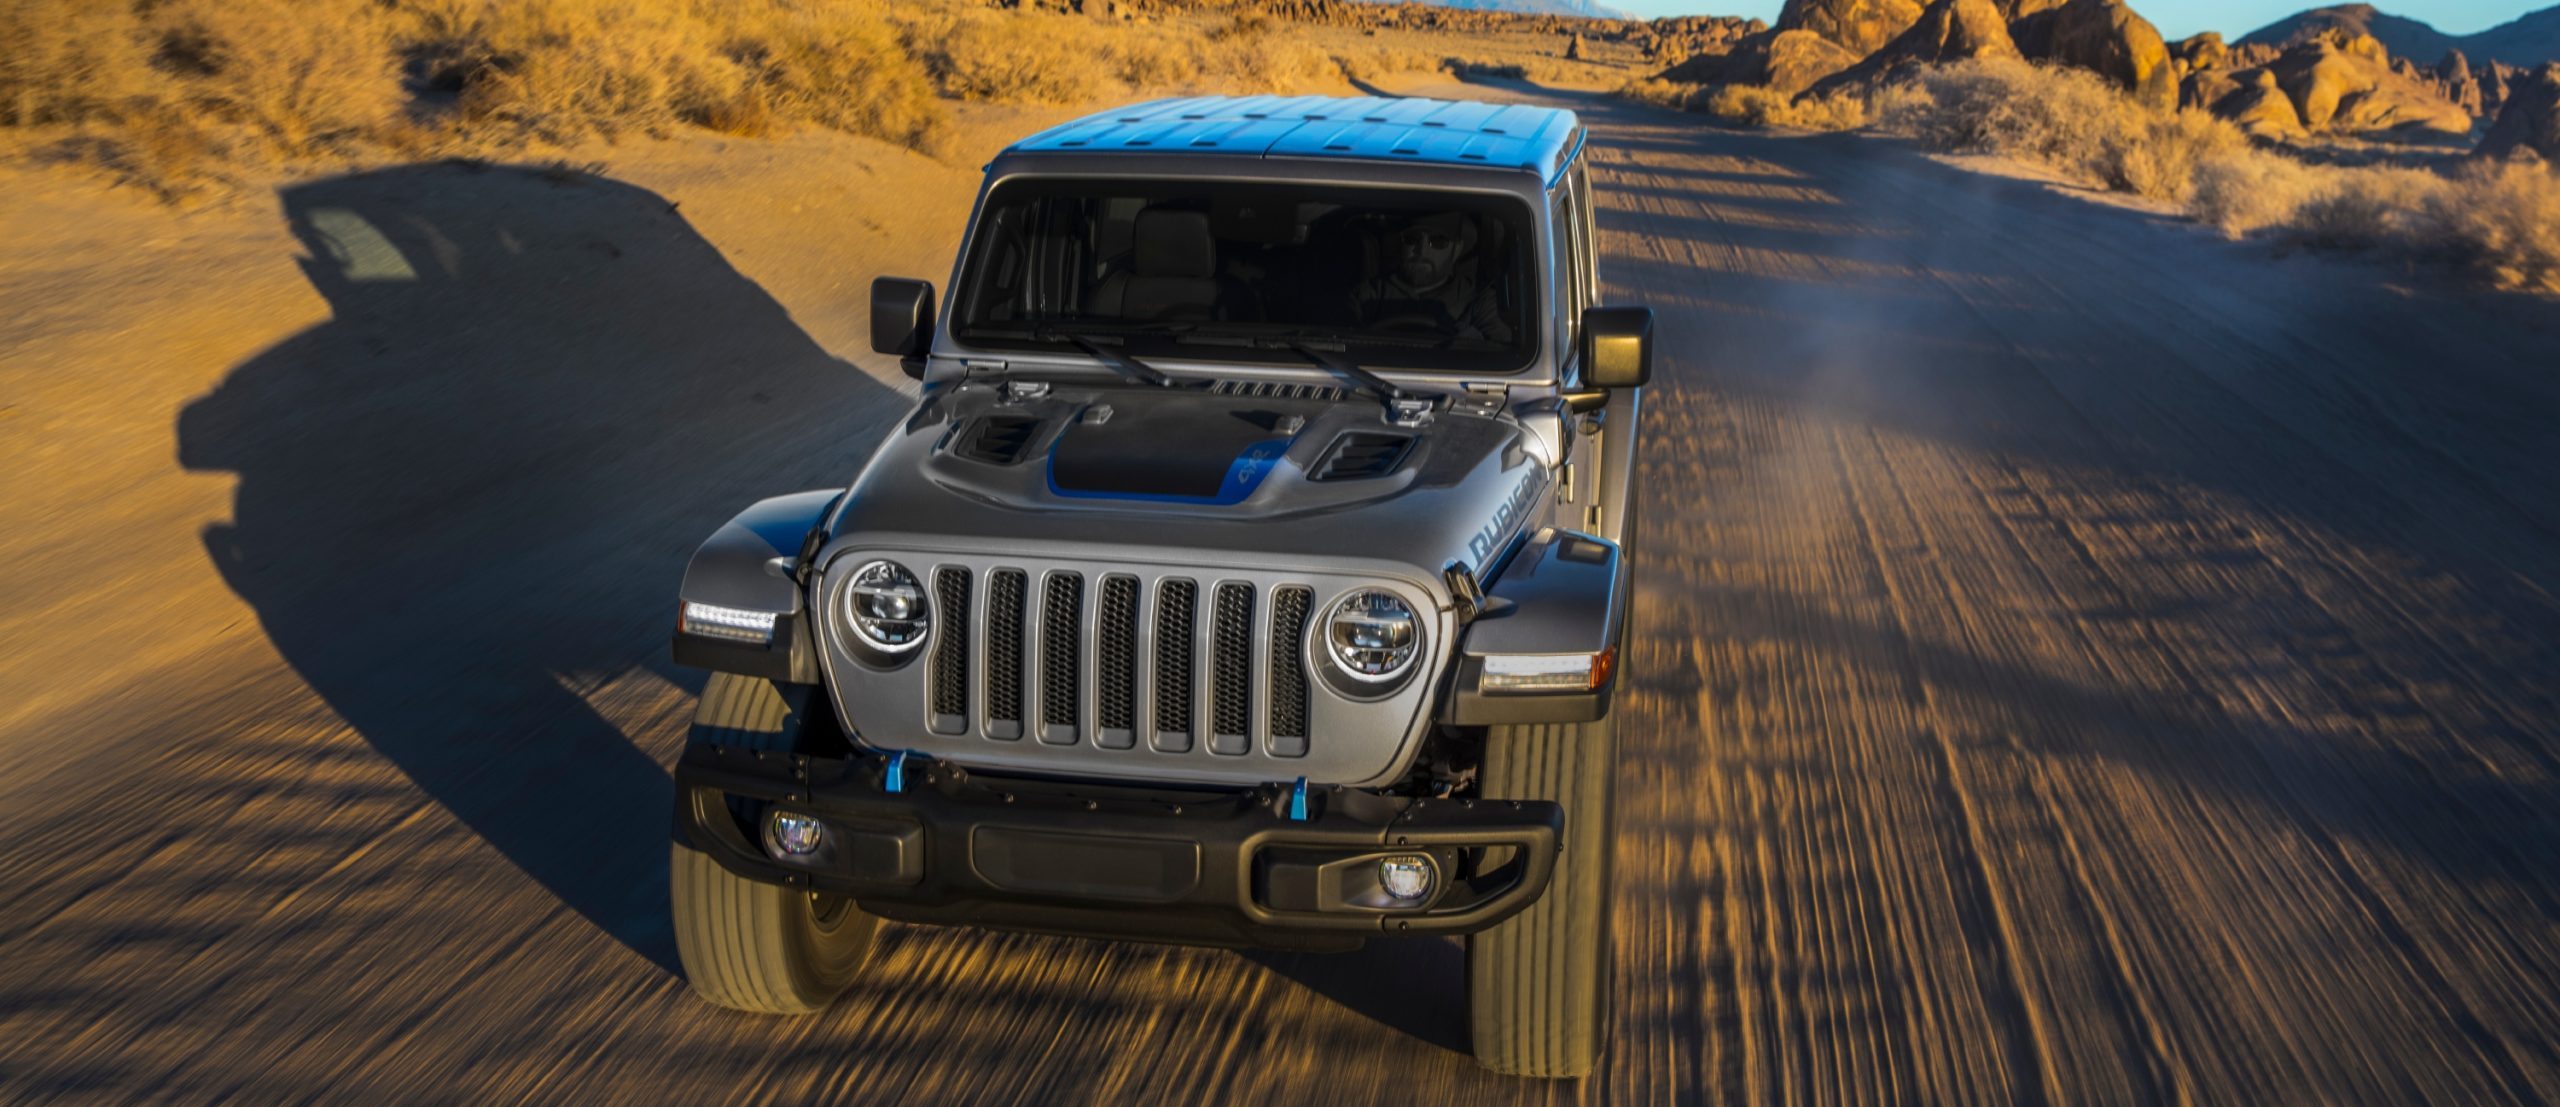 Jeep's Electrification Push Officially Begins As First Wrangler 4xe Models  Reach Customers: News - The Fast Lane Car